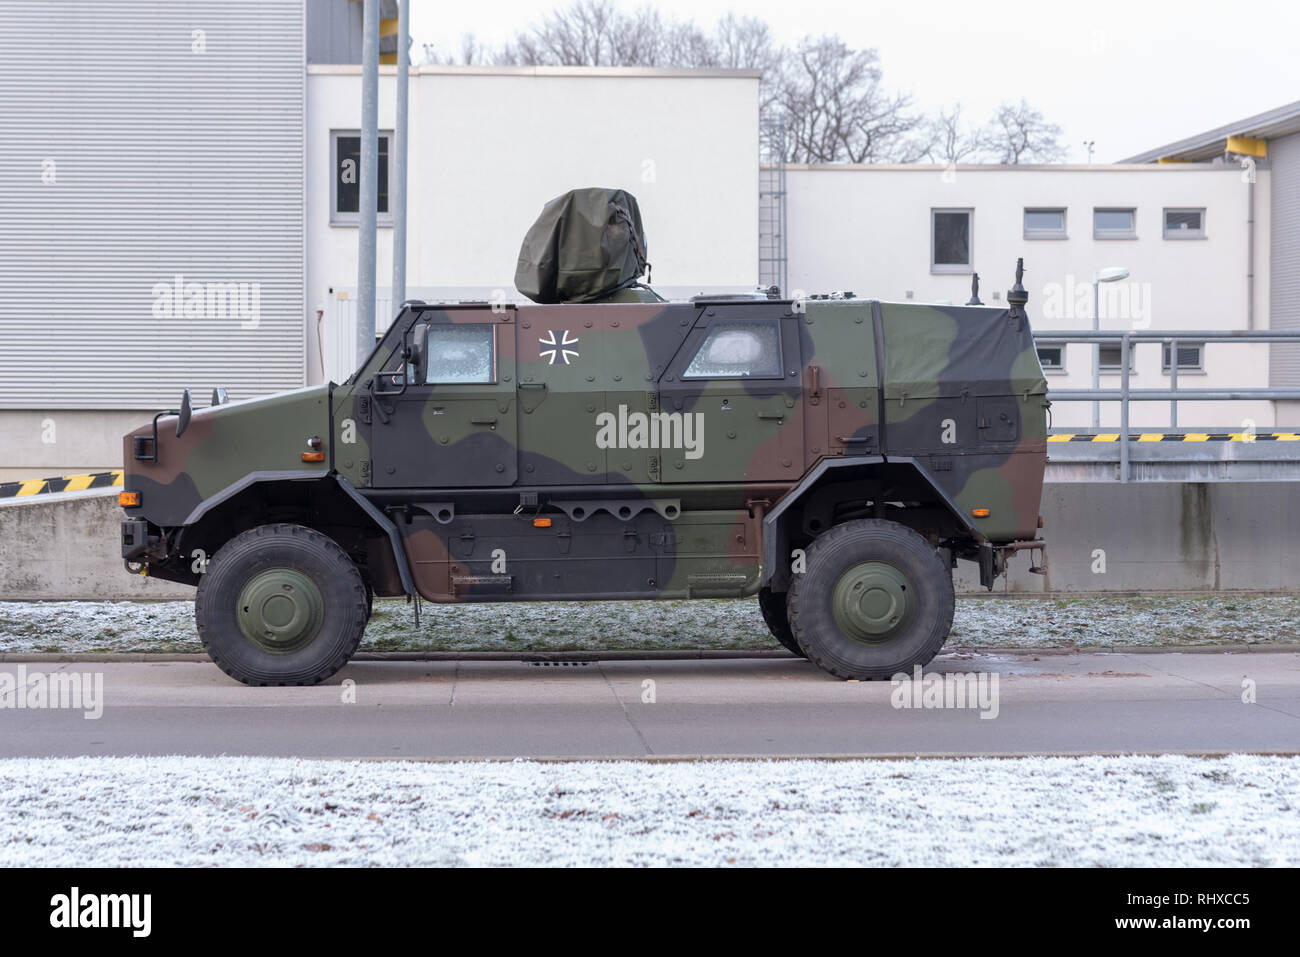 Burg, Germany - January 23, 2019: View of a protected convoy and patrol vehicle of the German Federal Armed Forces, type Dingo 1, parked at the roadsi Stock Photo